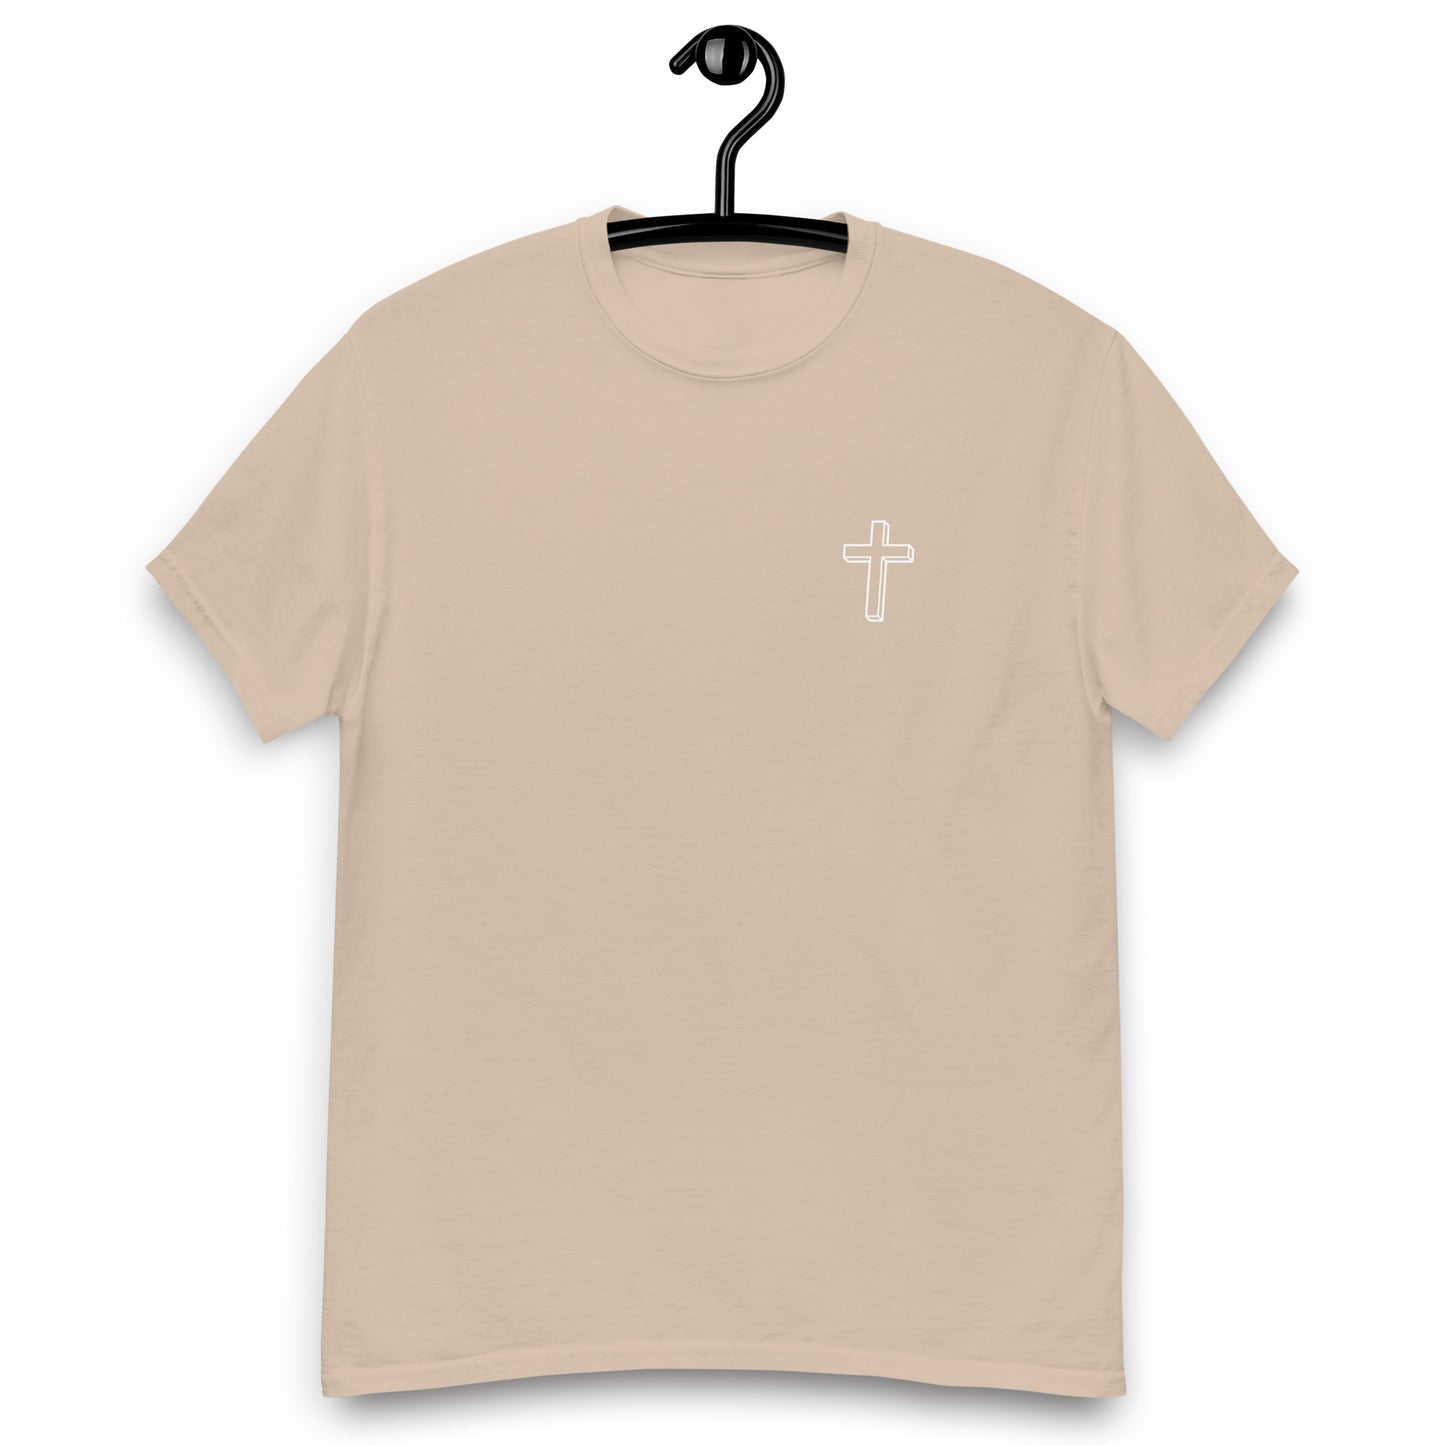 Lord I need you T-shirt